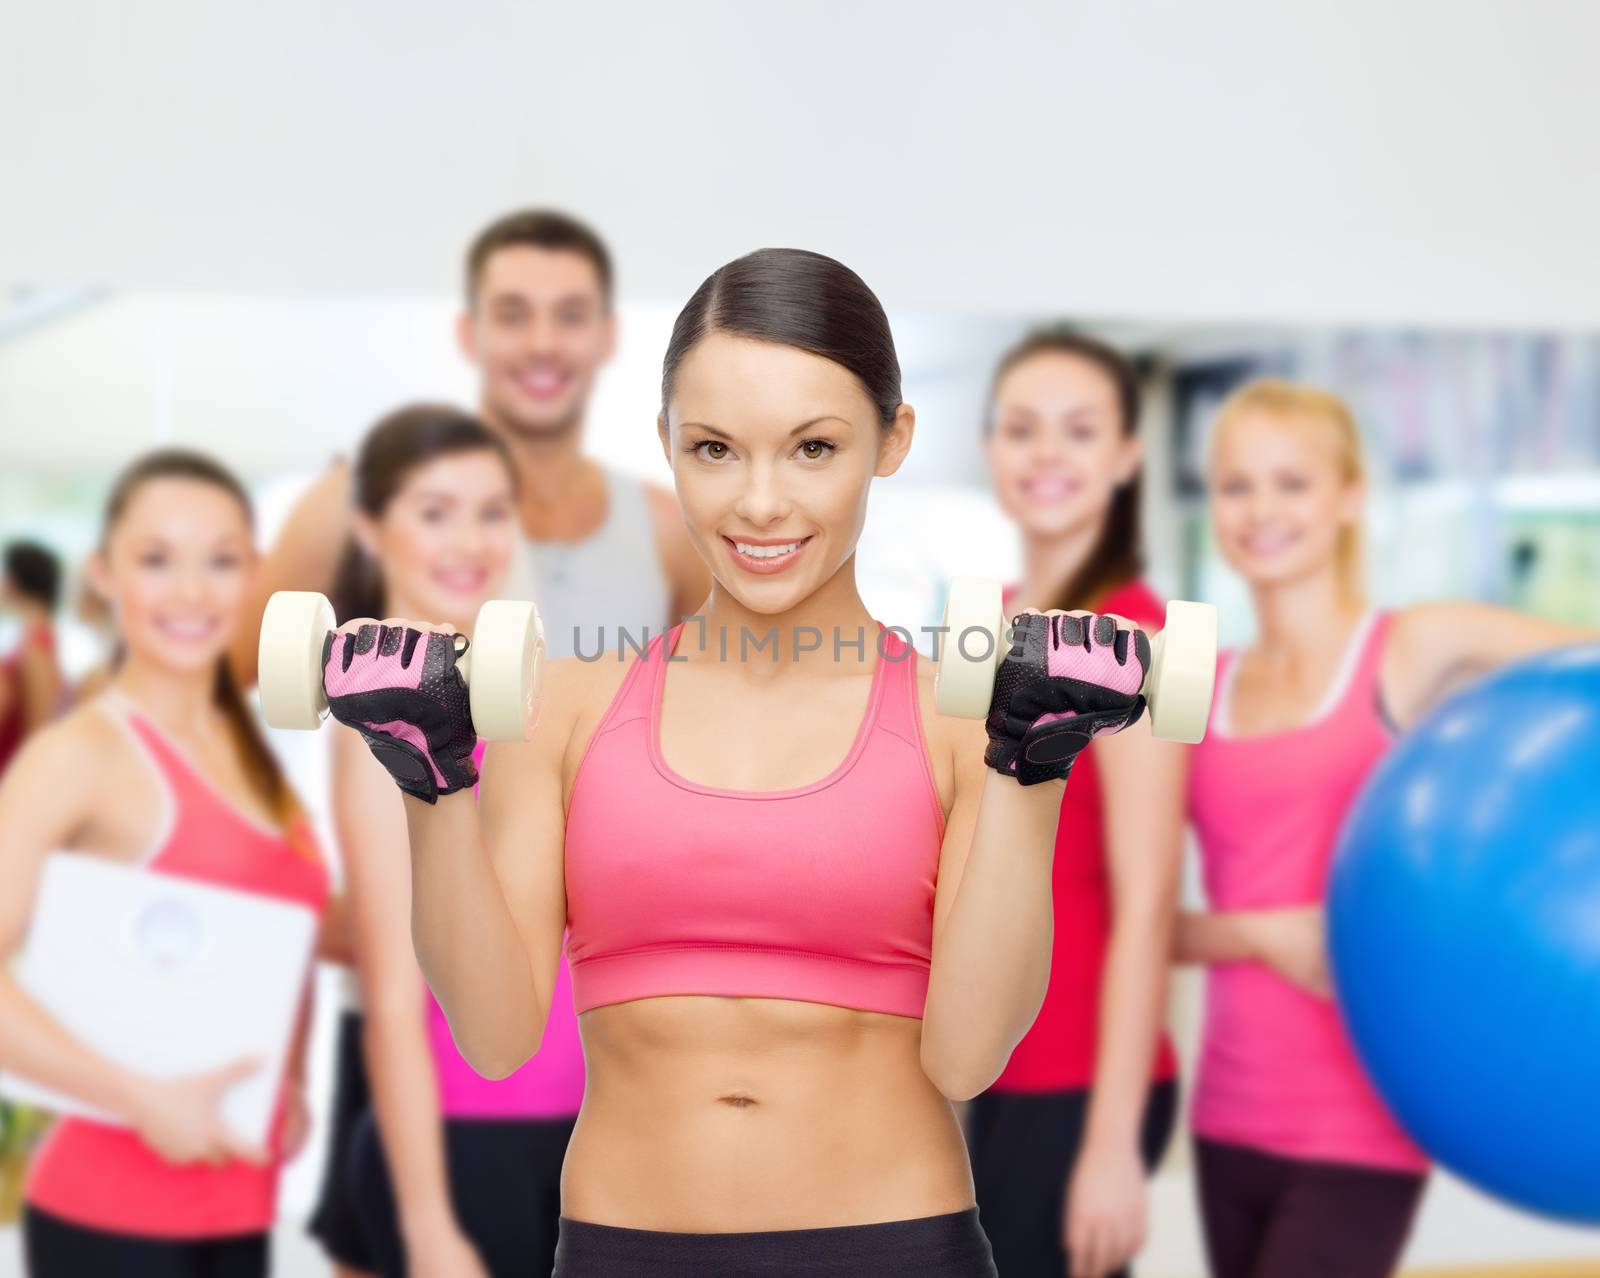 personal trainer with group in gym by dolgachov